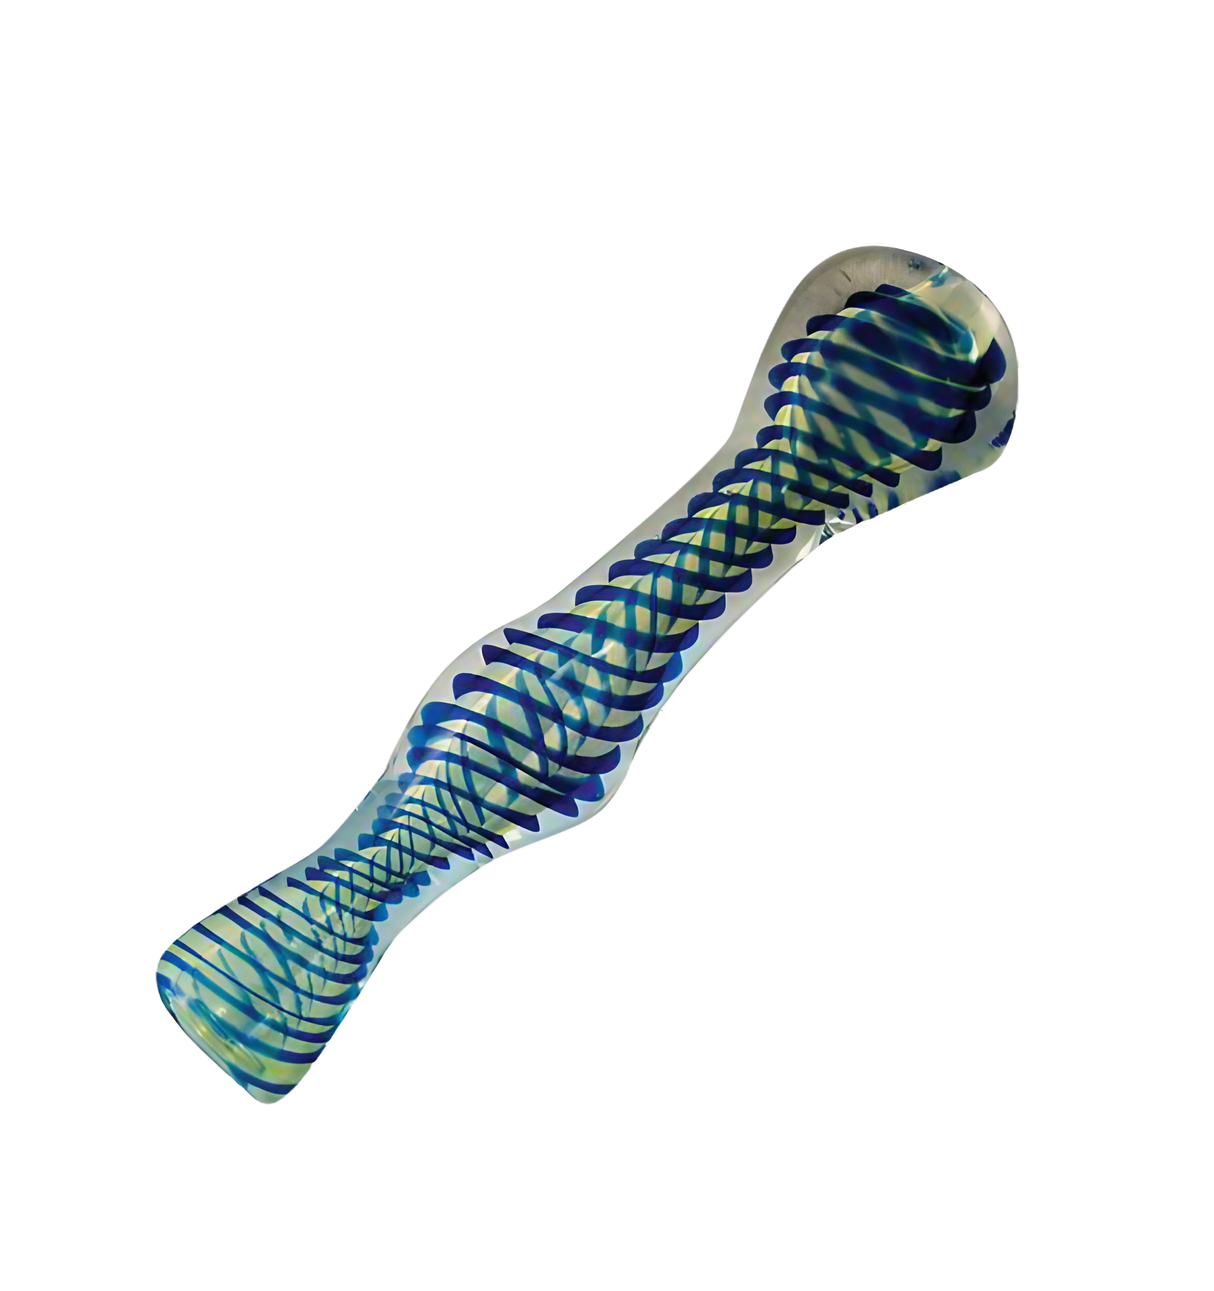 Twisted Taster Chillum Pipe, 4" Borosilicate Glass, Portable Design, Angled Side View